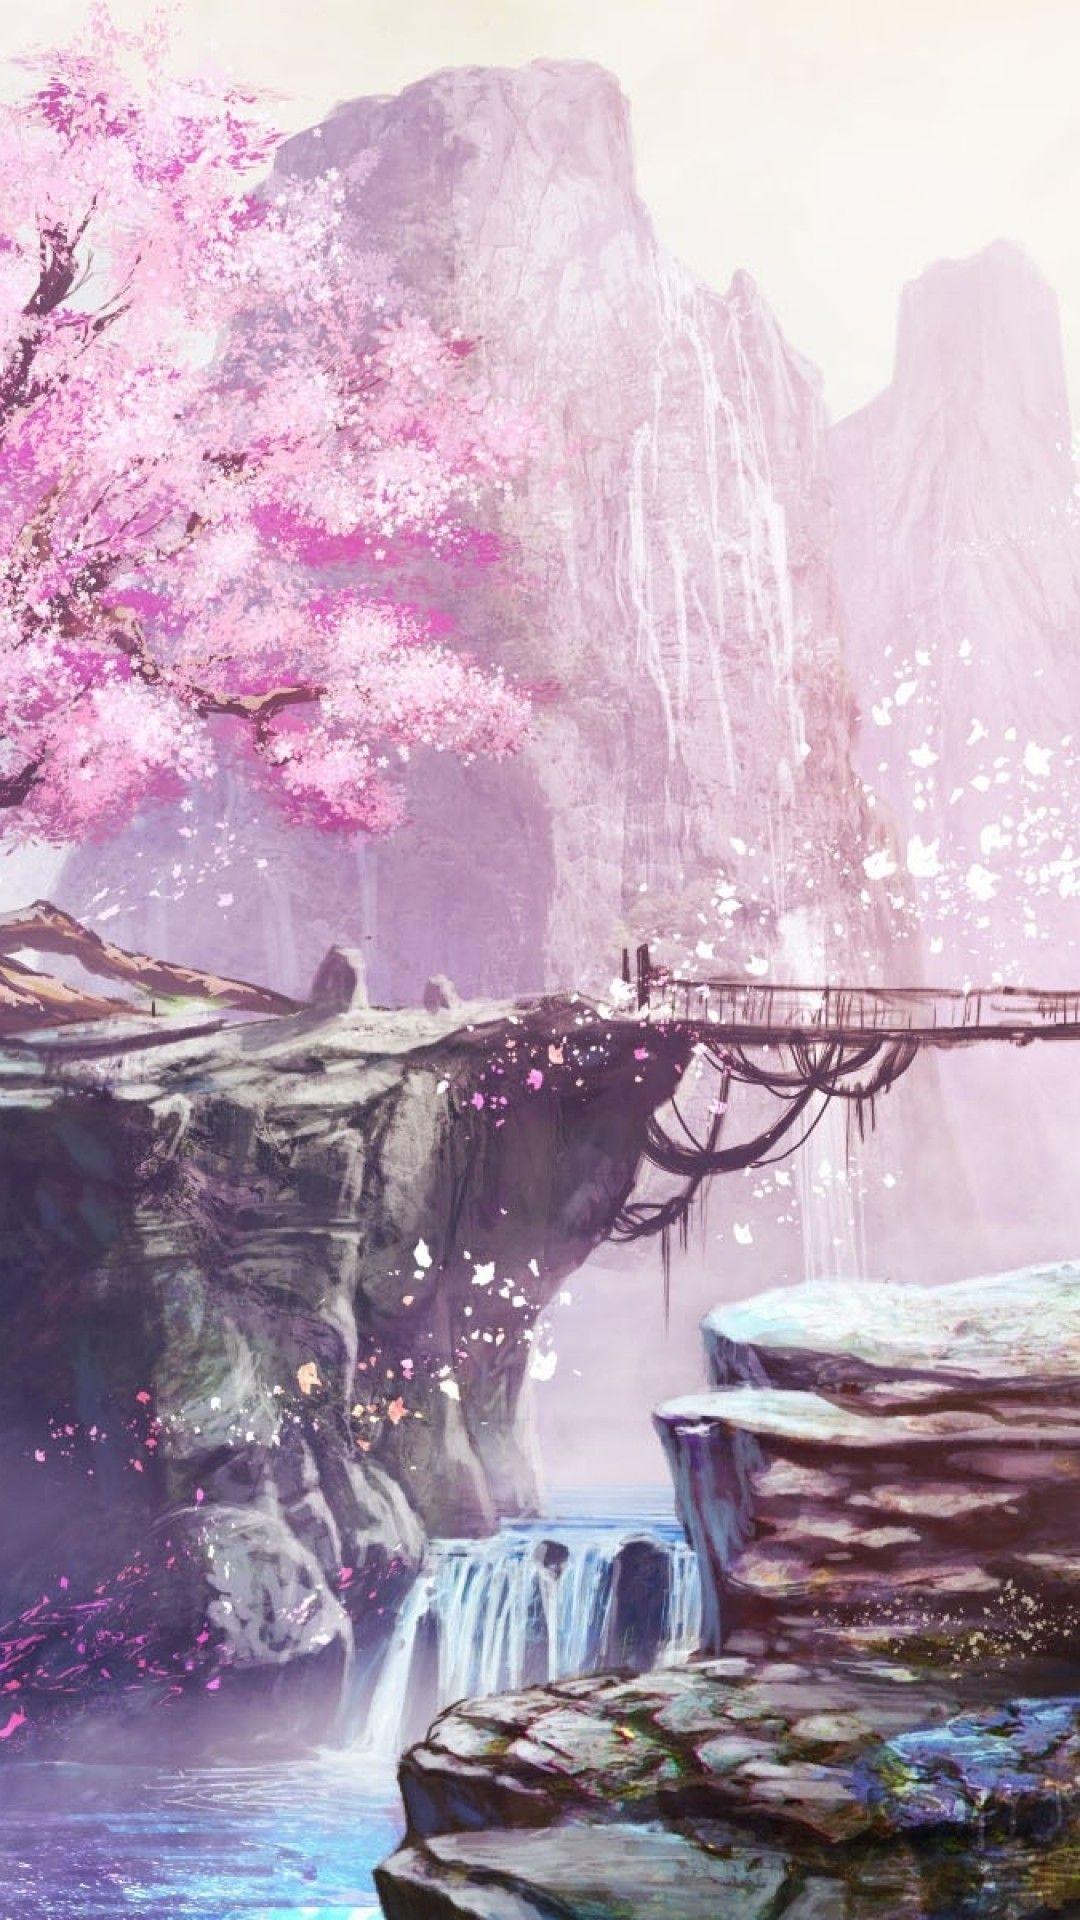 Anime Cherry Blossom Couple Hd Wallpapers - Wallpaper Cave